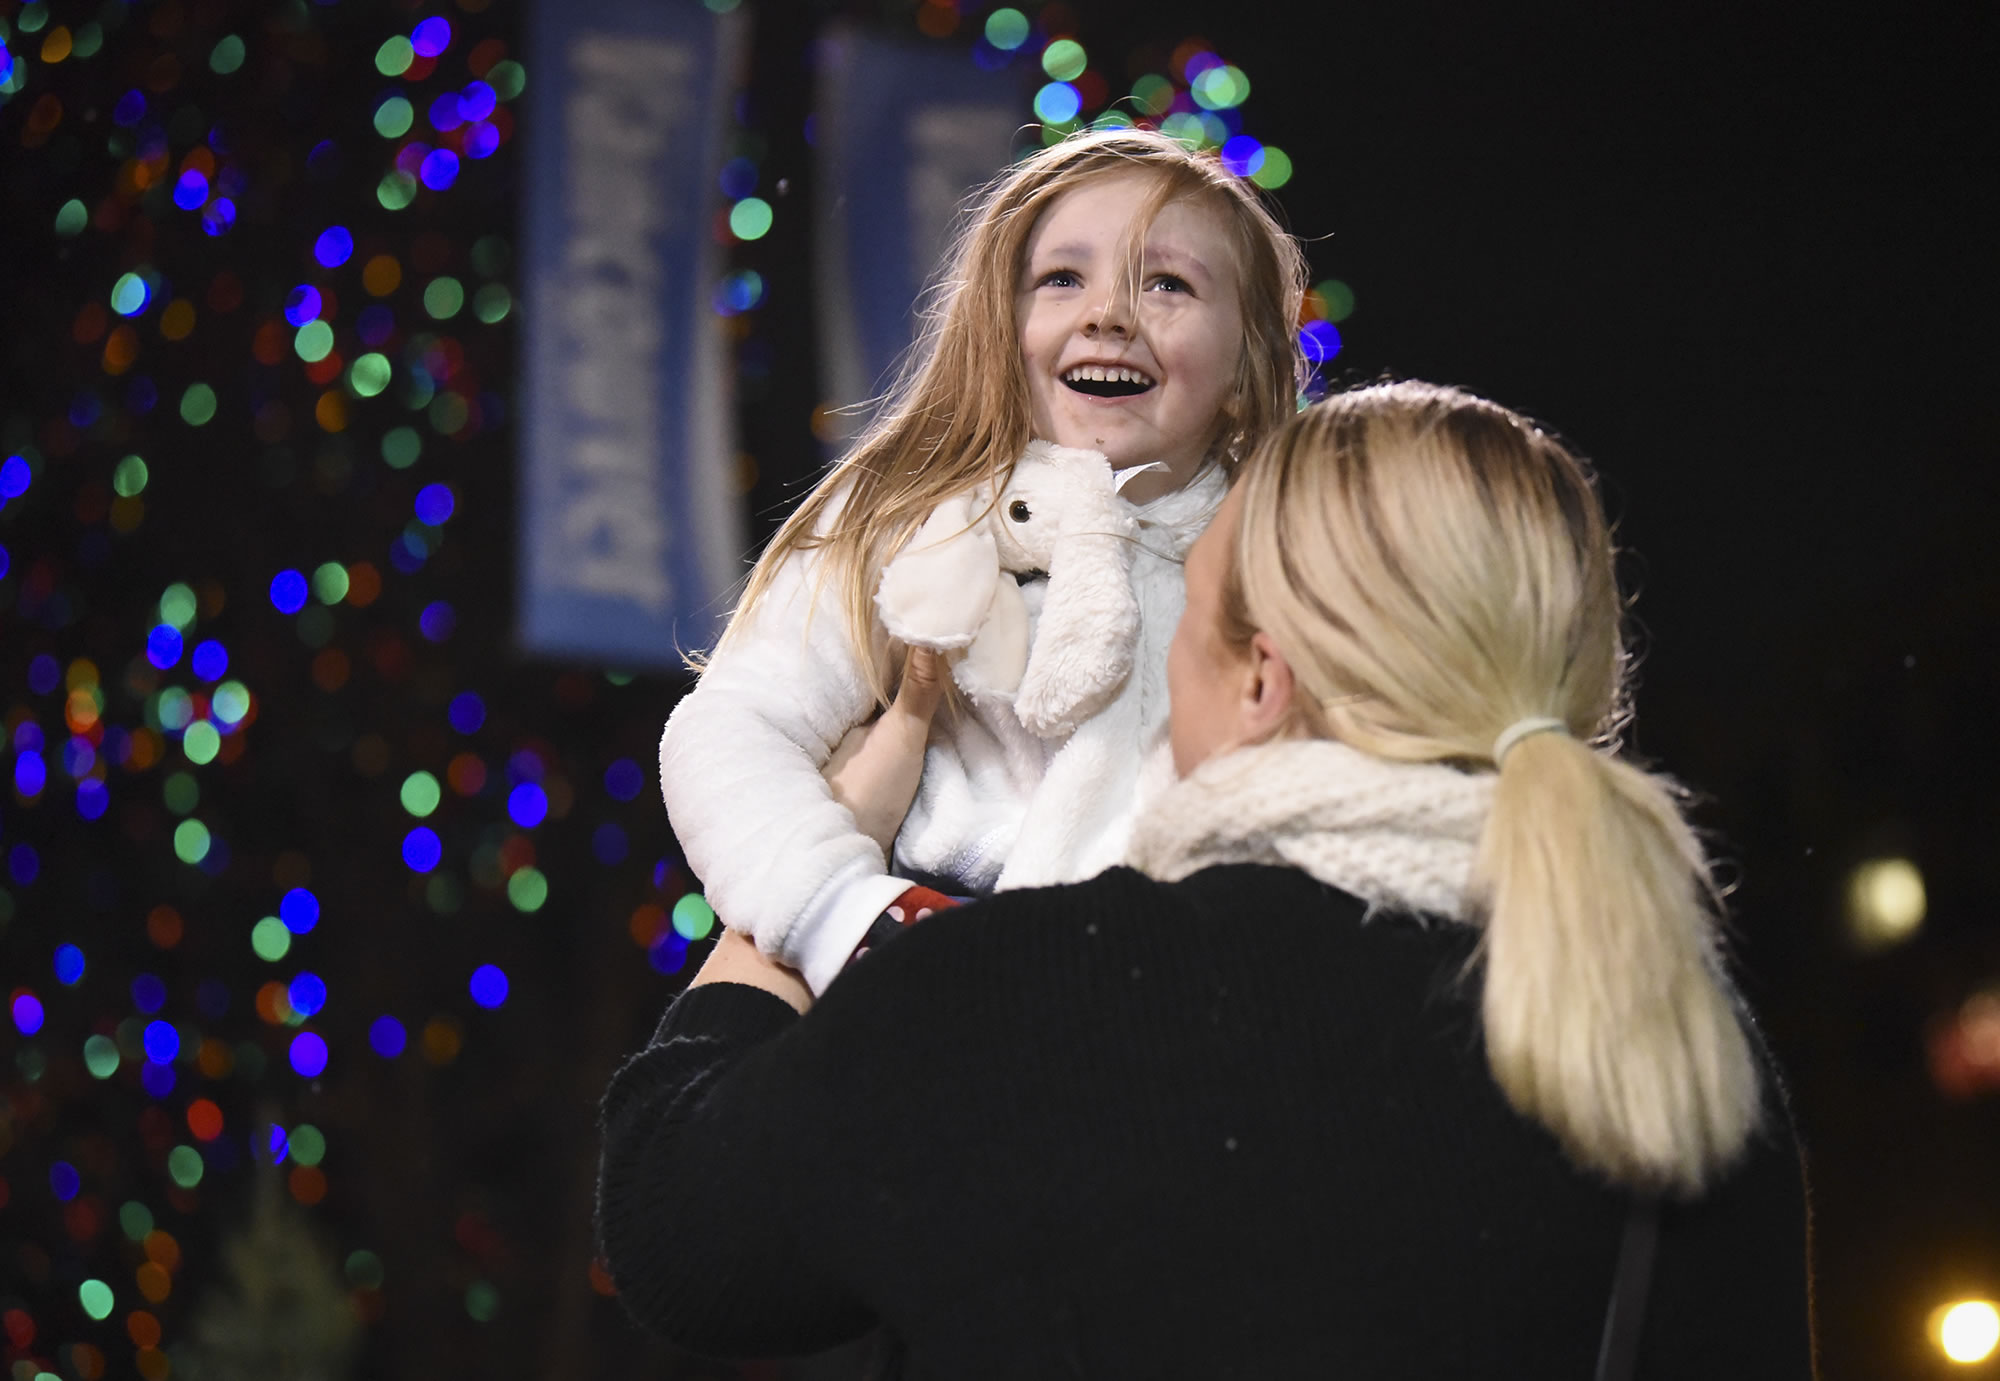 Claire Woodman, 3, smiles as her mother, Christina Sanderson, tosses her in the air at Activate Church’s sixth annual Christmas at the Park in Esther Short Park.